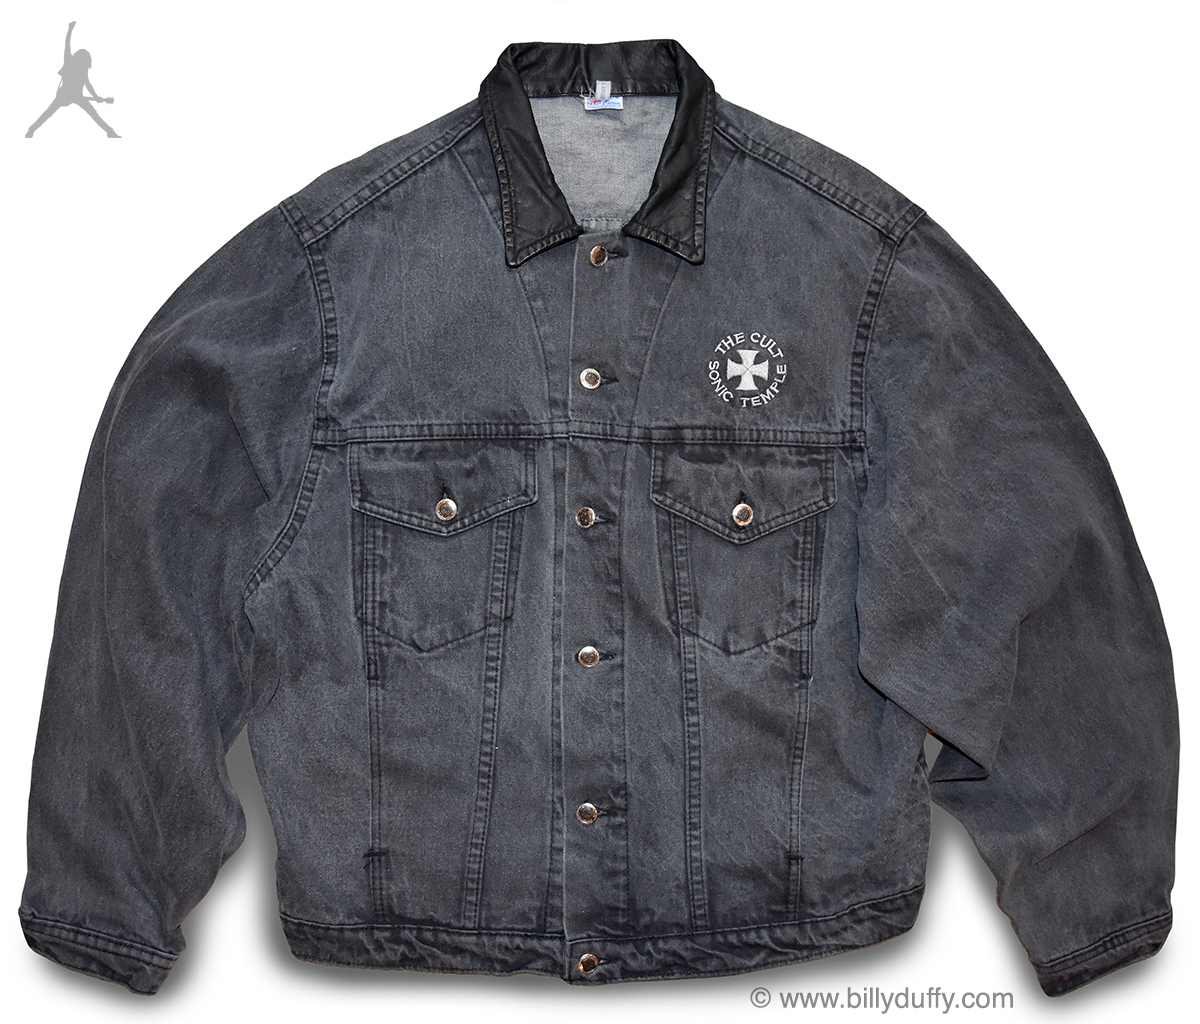 Billy's 'Sonic Temple' Denim Tour Jacket - Billy Duffy